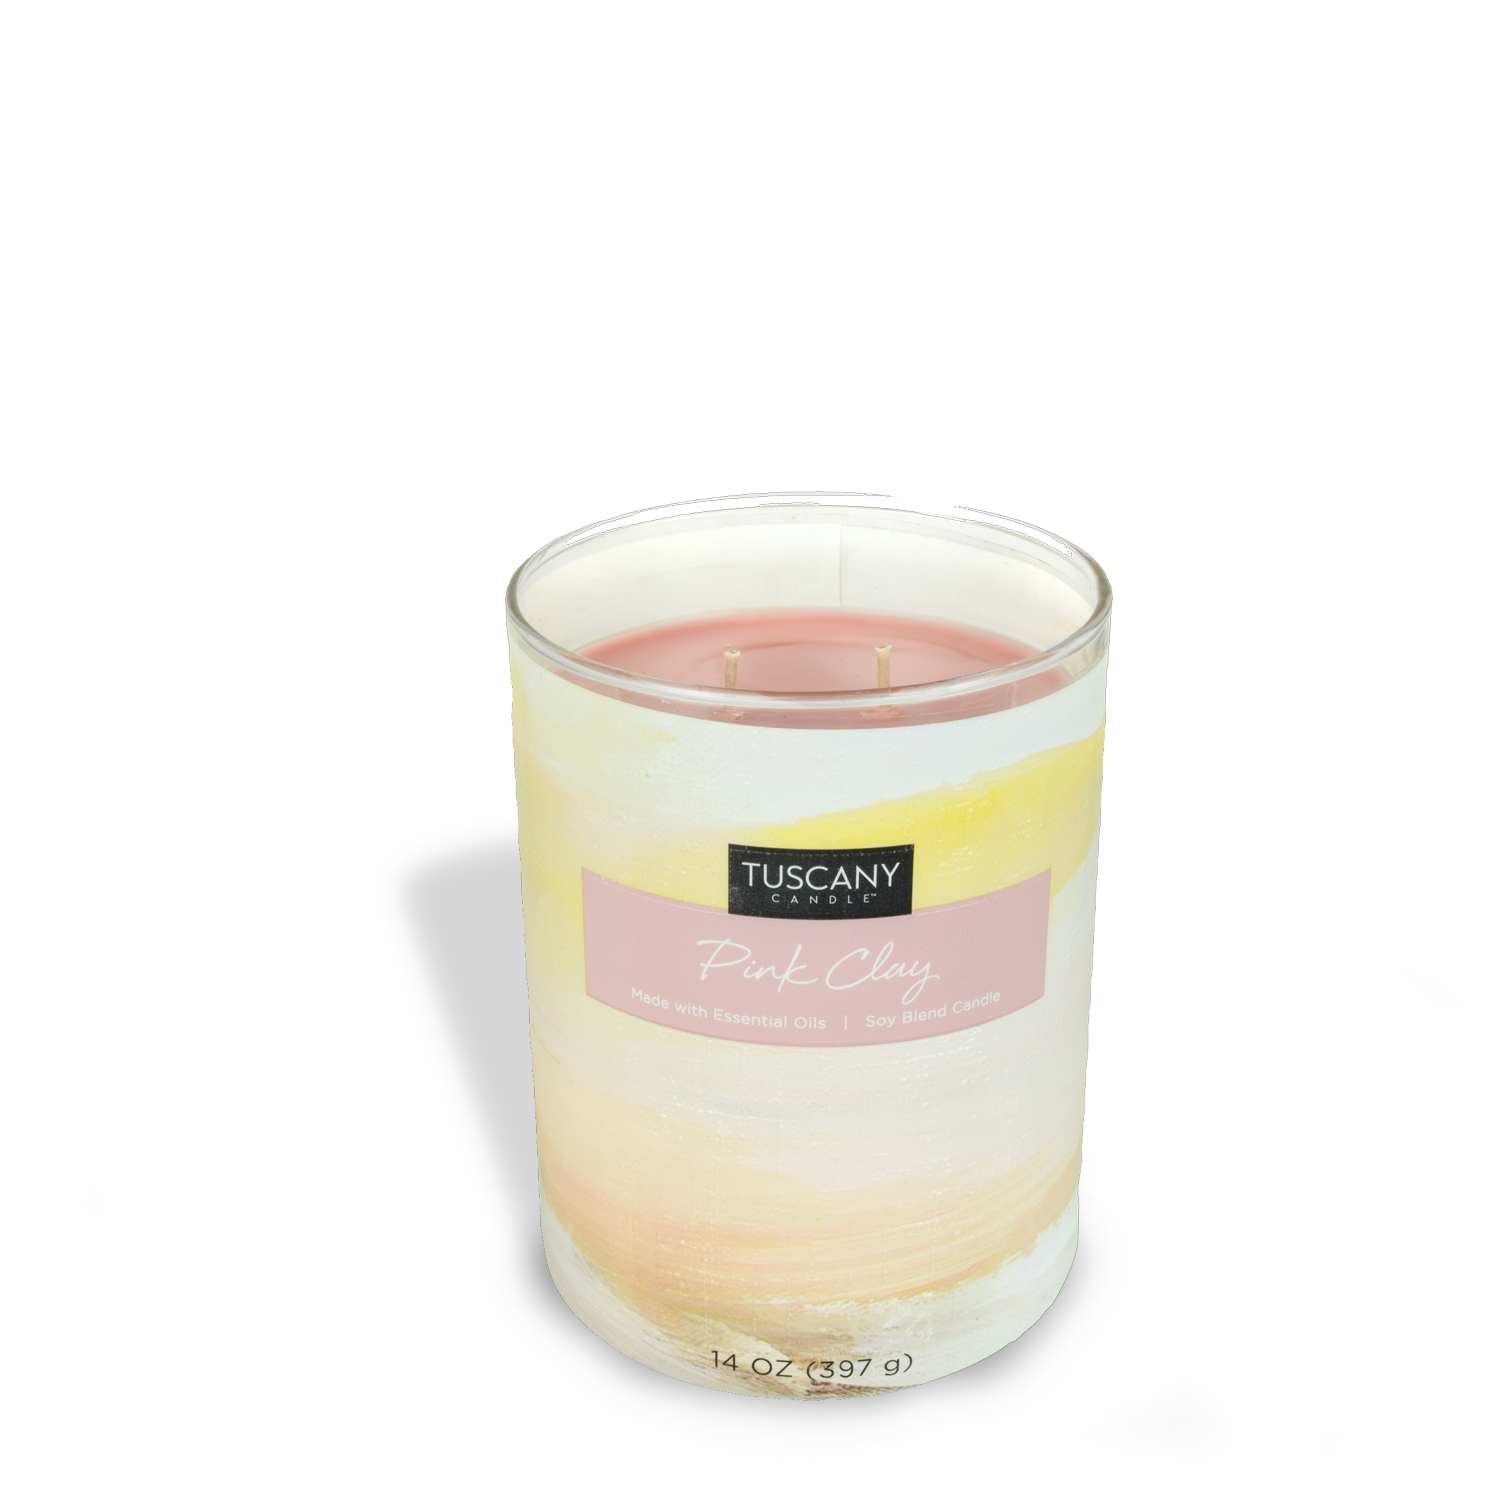 A Tuscany Candle Home Décor (14 oz) - Pink Clay fragrance candle with a pink and white design on a white background.